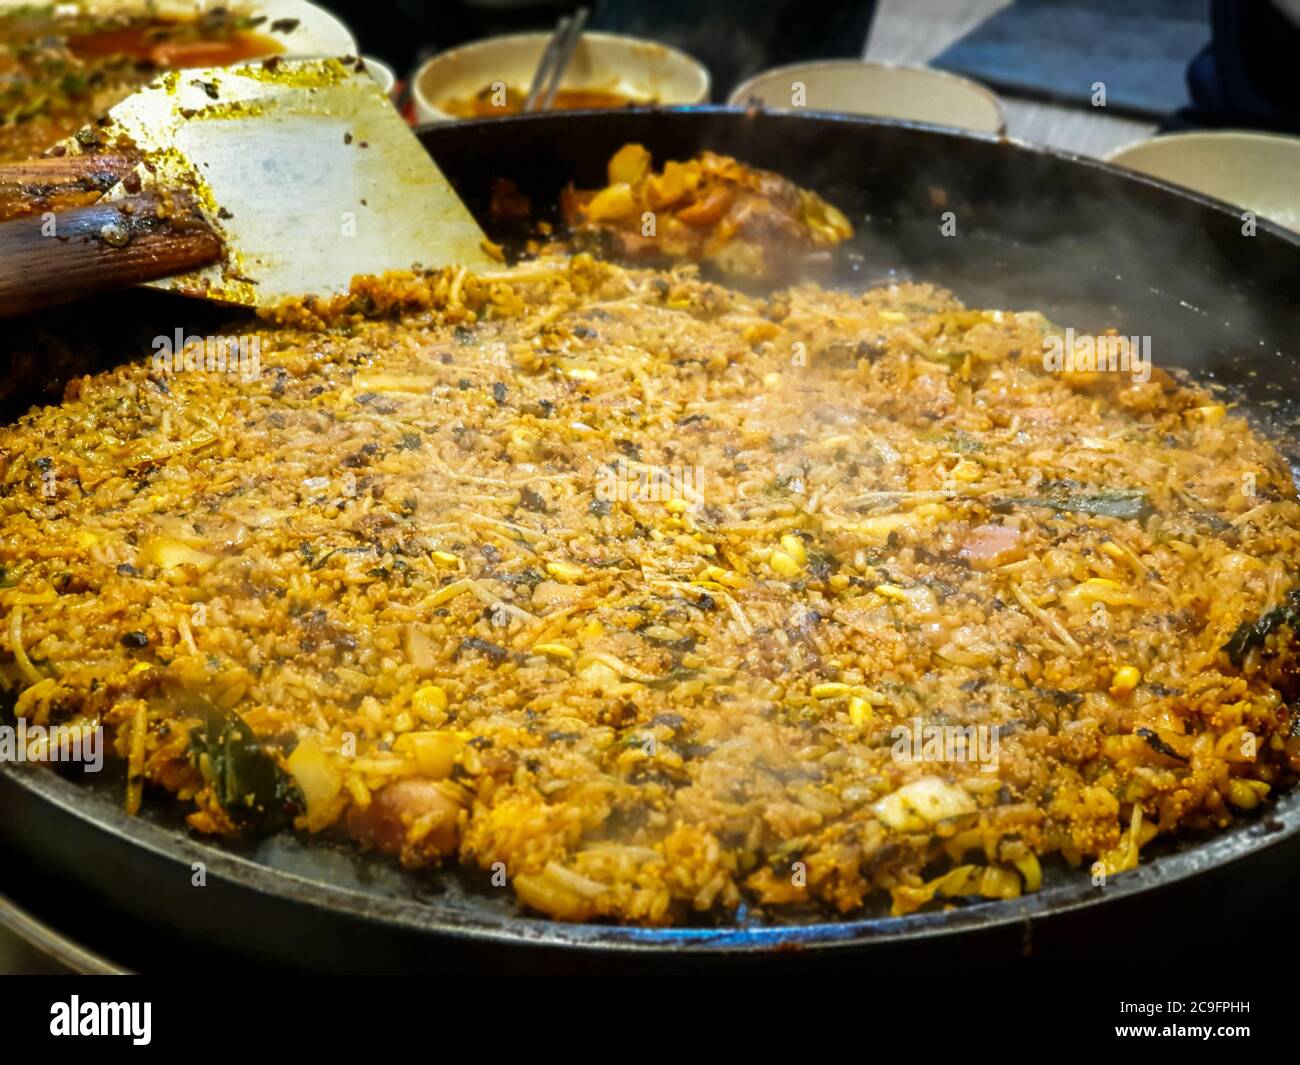 Fried Rice after Cheese Dak-galbi, spicy stir-fried chicken rib, vegetable, noodle and cheese on grill - South Korea. Popular Korean food. Stock Photo